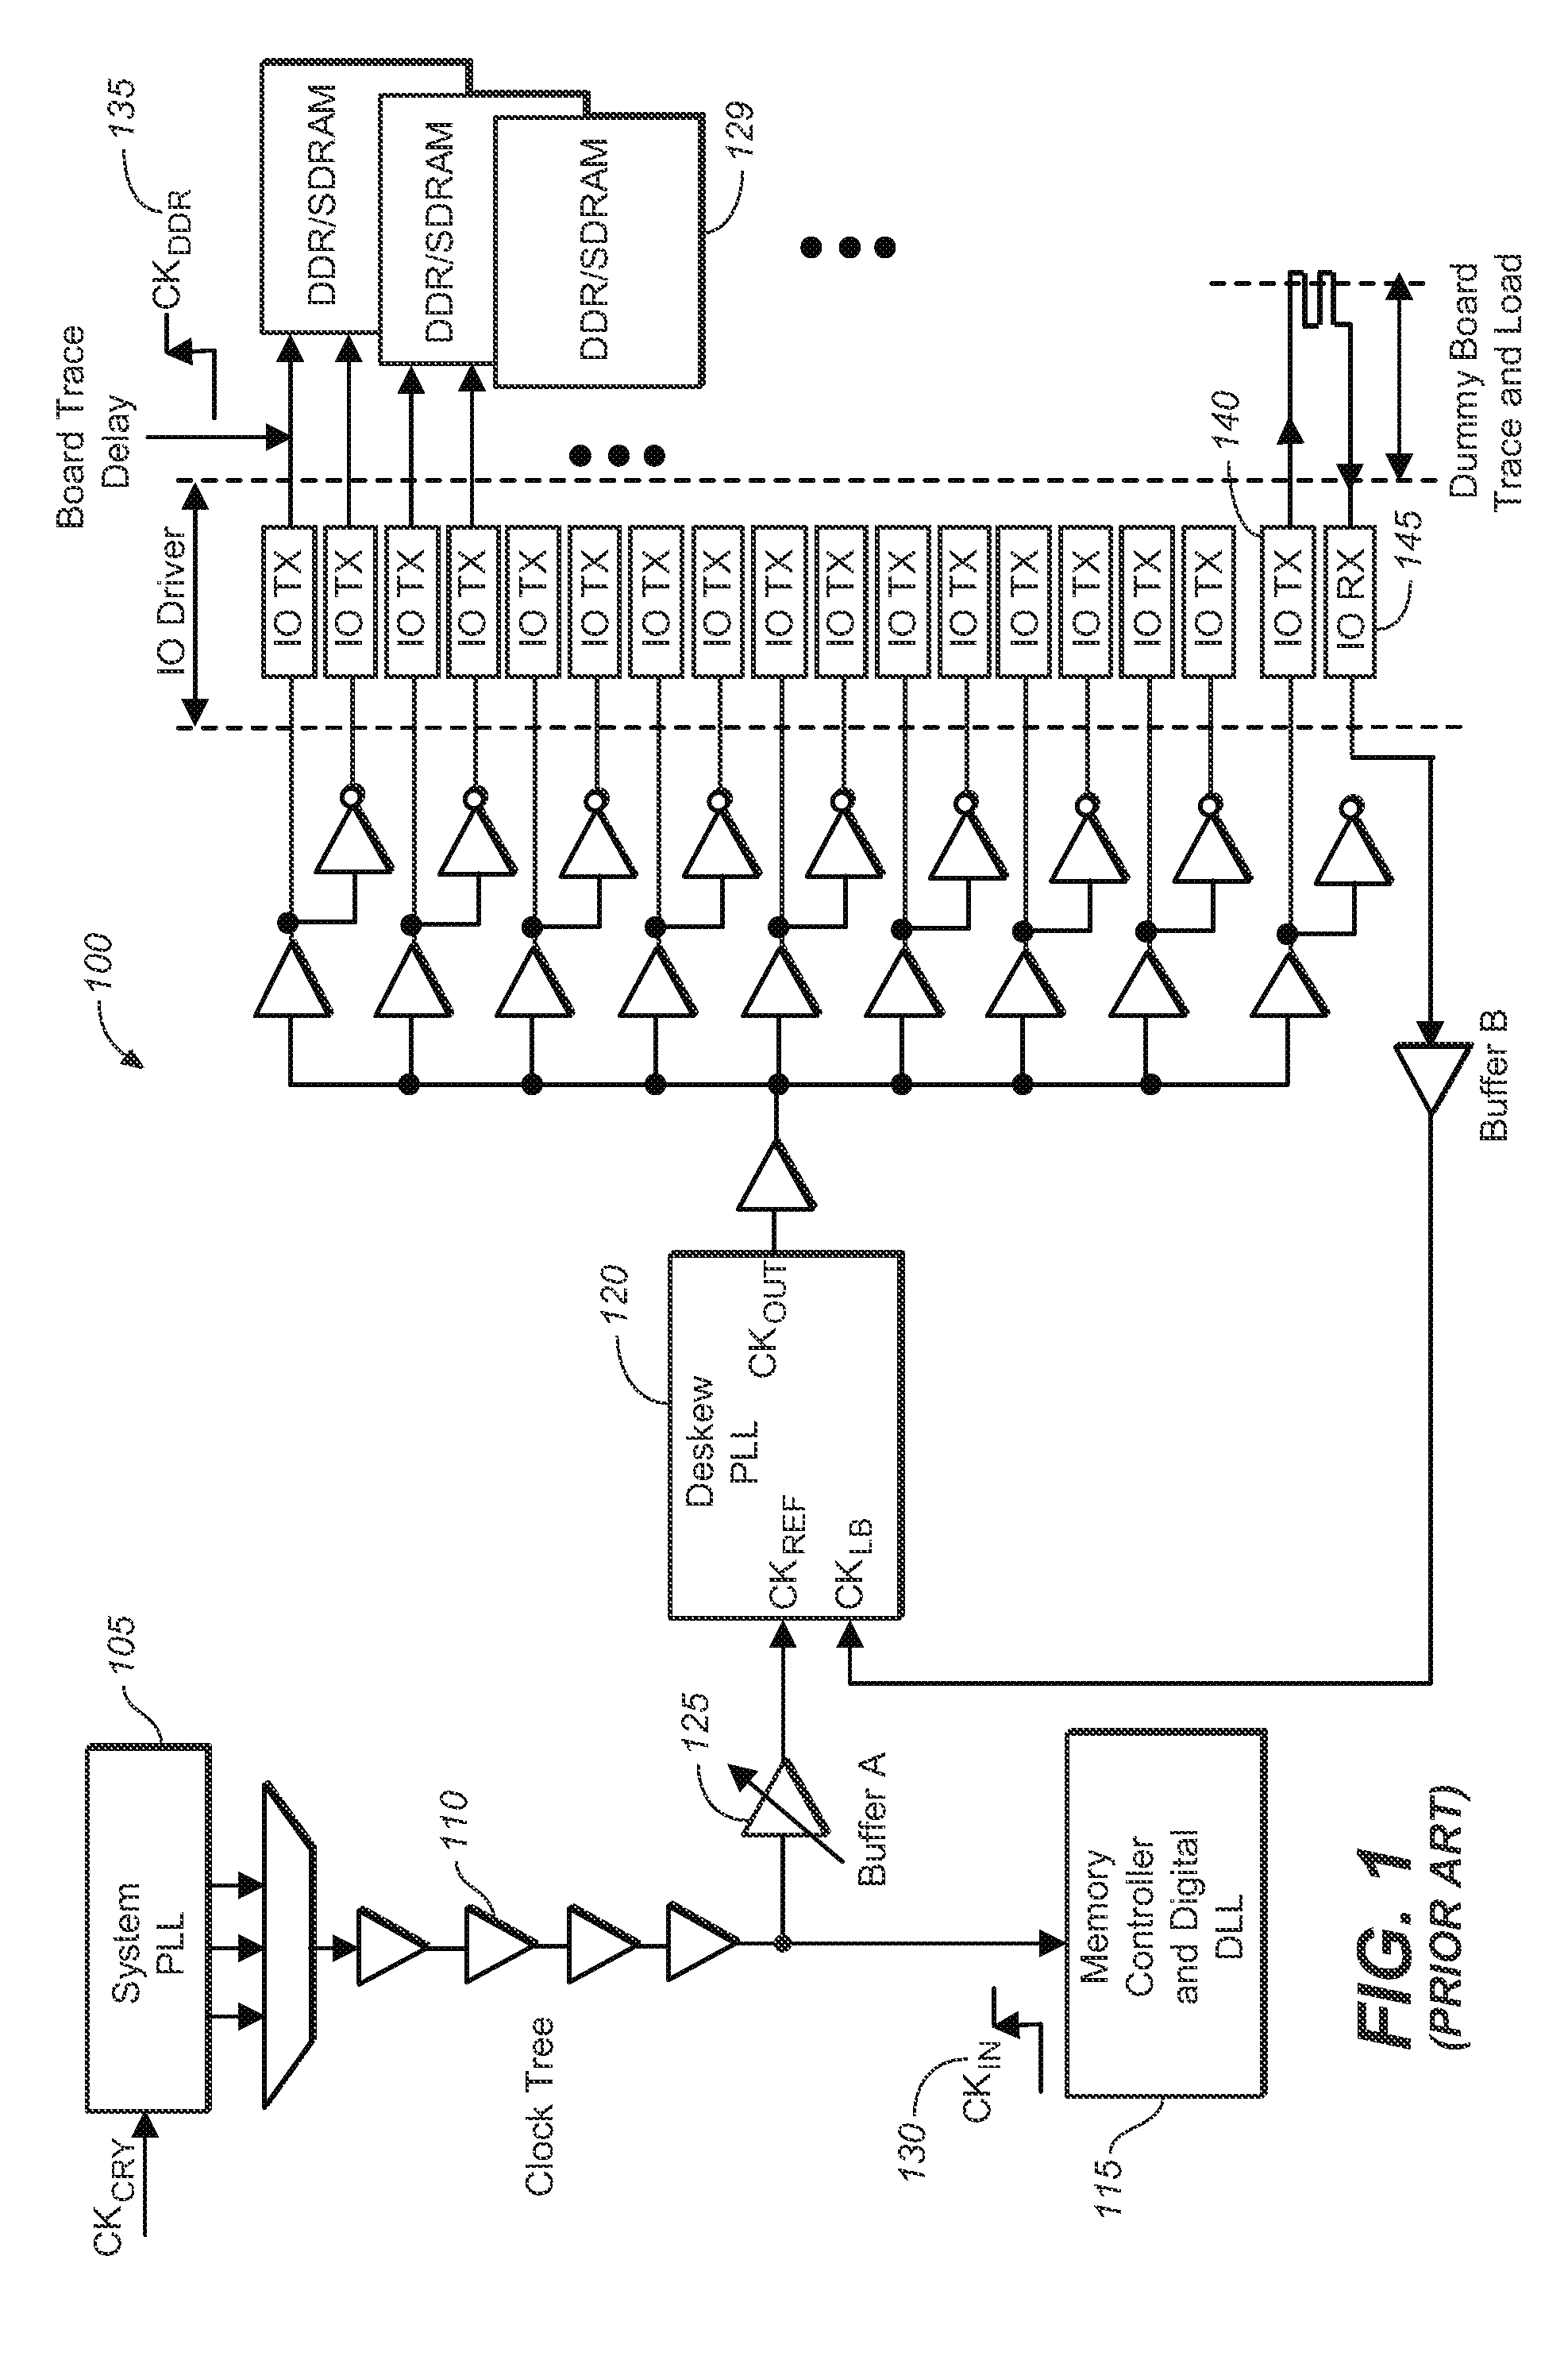 System and method for phase-locked loop (PLL) for high-speed memory interface (HSMI)